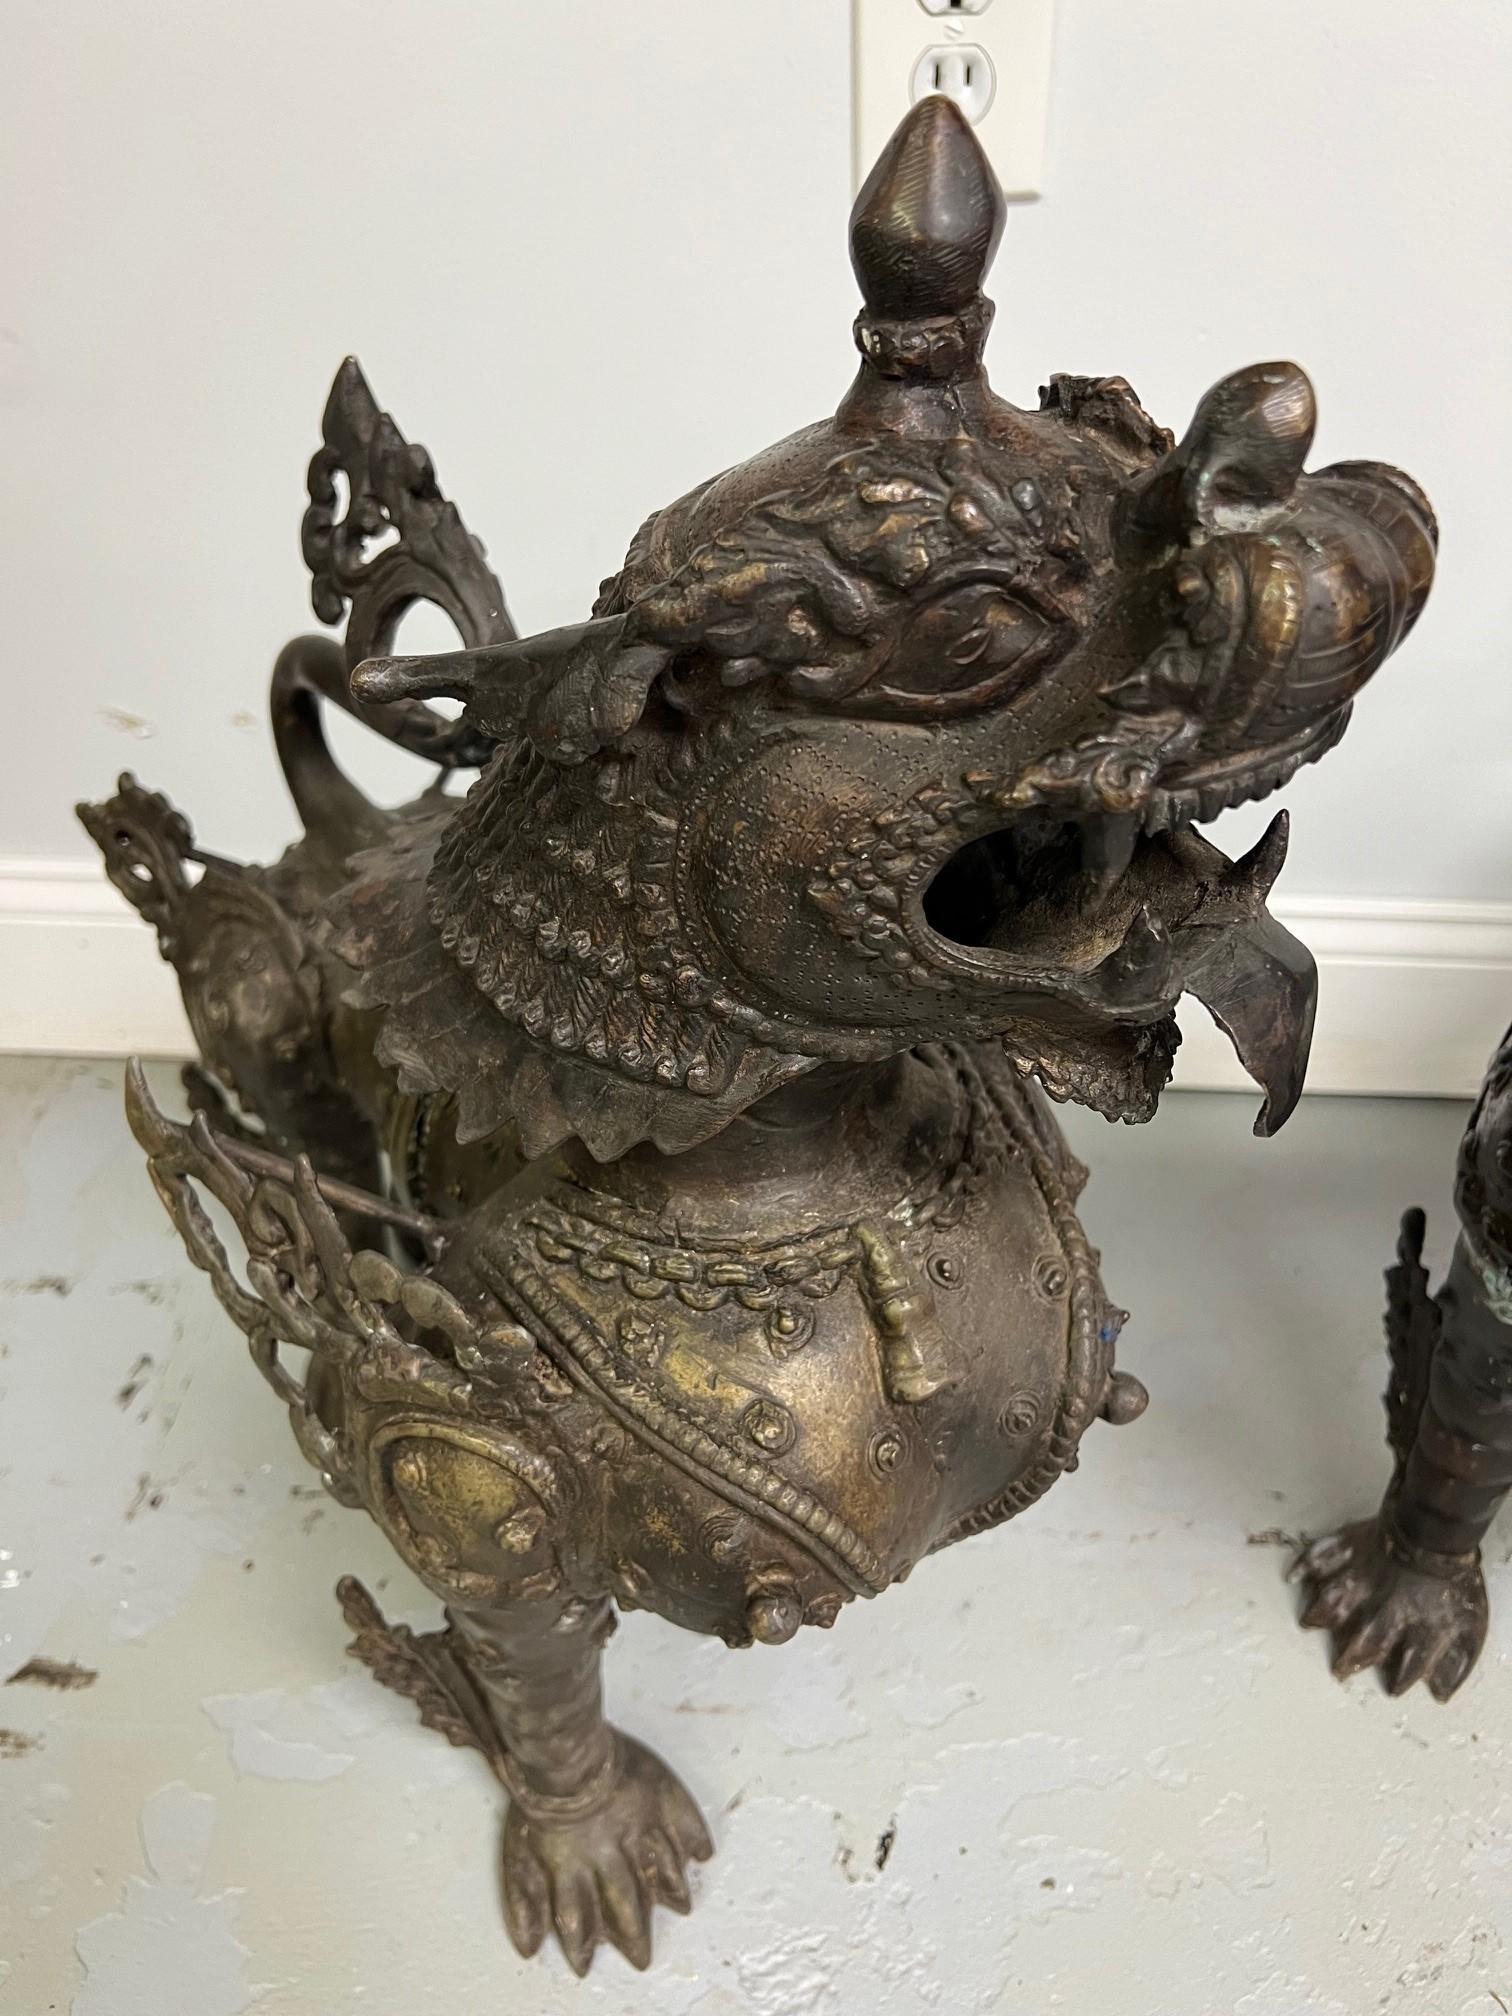 Impressive pair of large bronze Foo Dogs or Tibetan snow lions in full armor. Tibetan snow lions are known for protective qualities, they are celestial animal emblem of Tibet that embodies power, playfulness, fearlessness and joy. The snow lion is